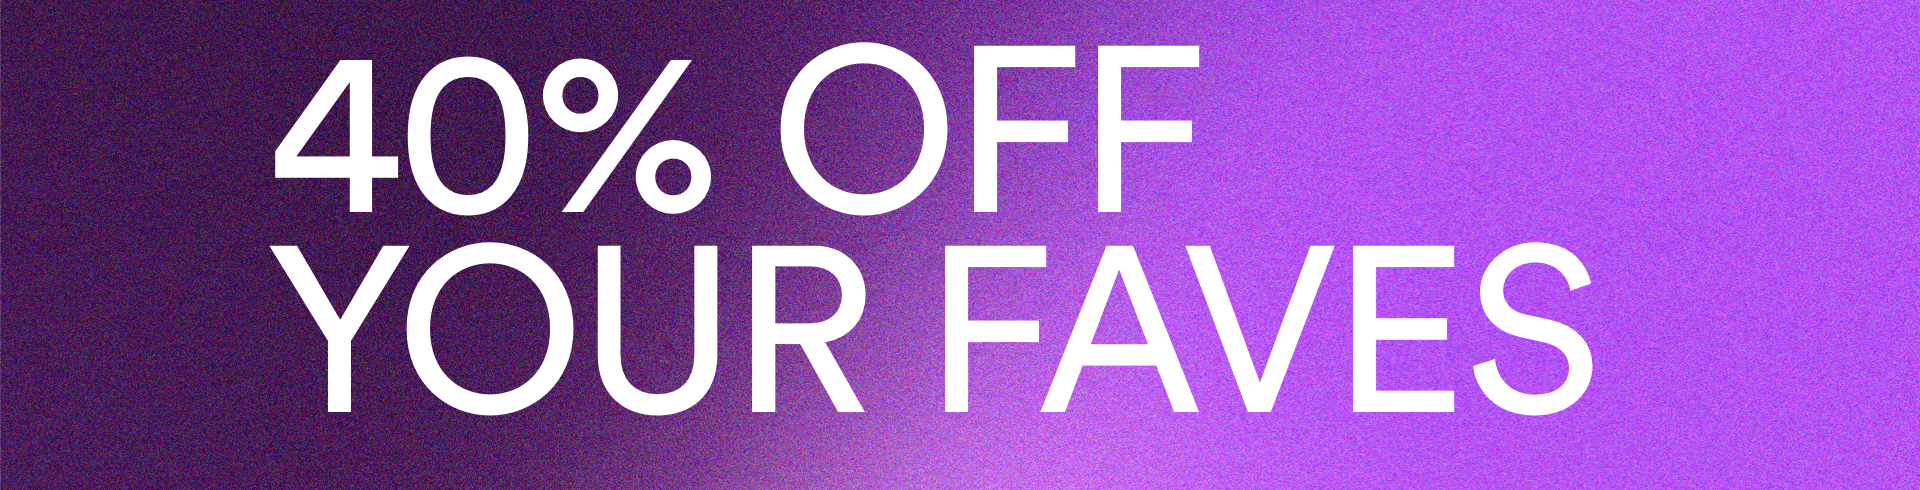 40% Off Your Faves. Online Exclusive. Selected Styles. Limited Time Only. Shop Now